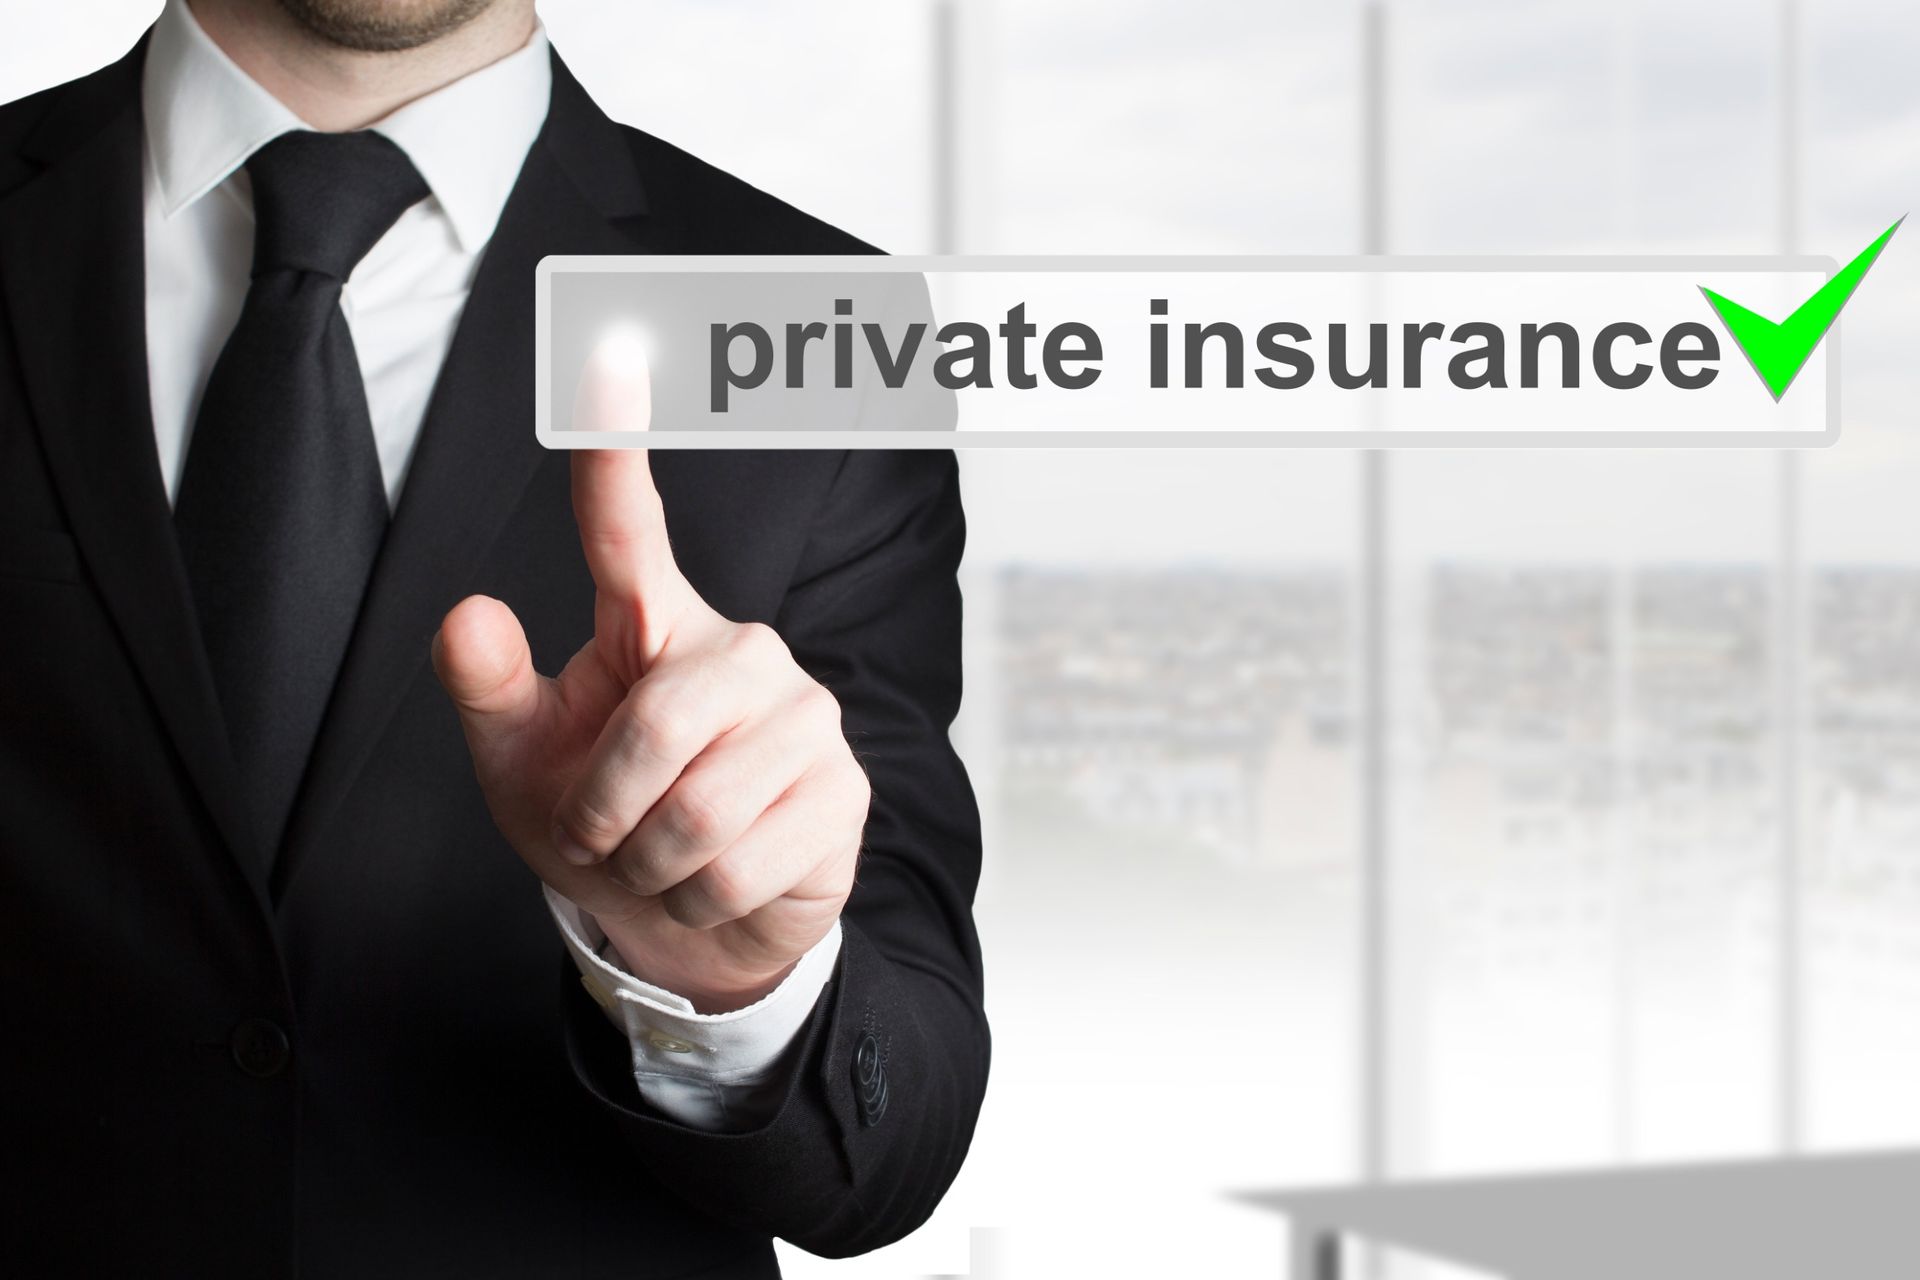 a man in a suit and tie is pressing a button that says private insurance